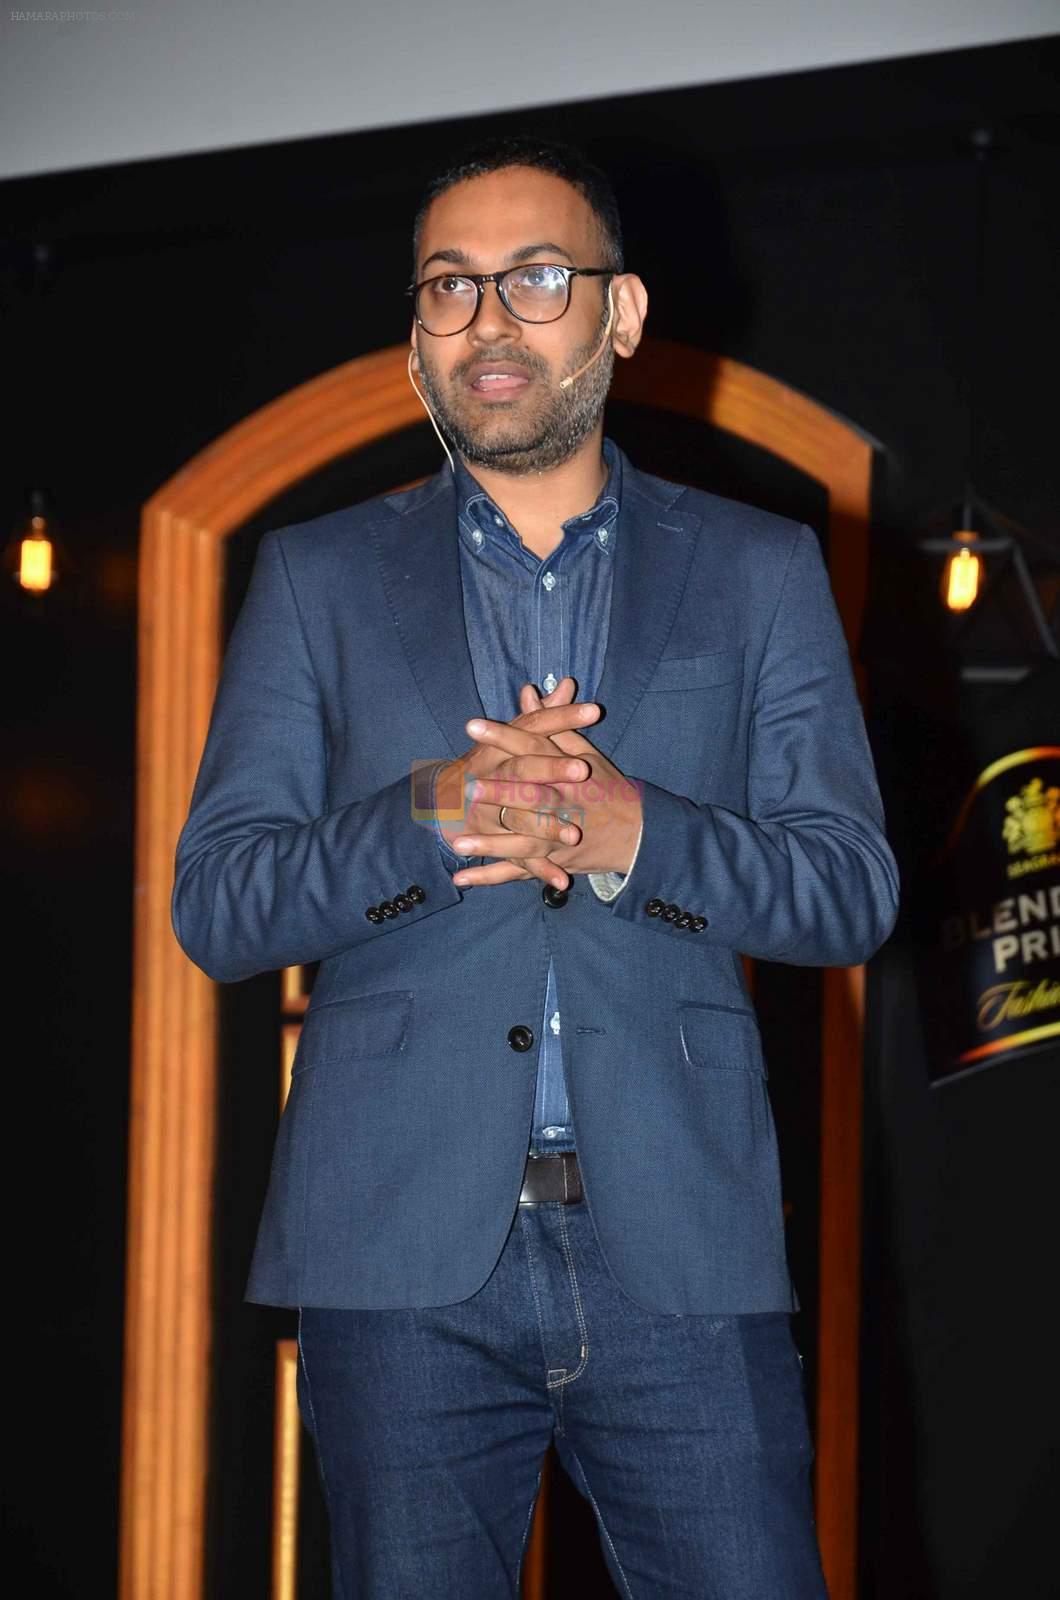 at Blenders Pride tour preview in Mumbai on 21st Sept 2015